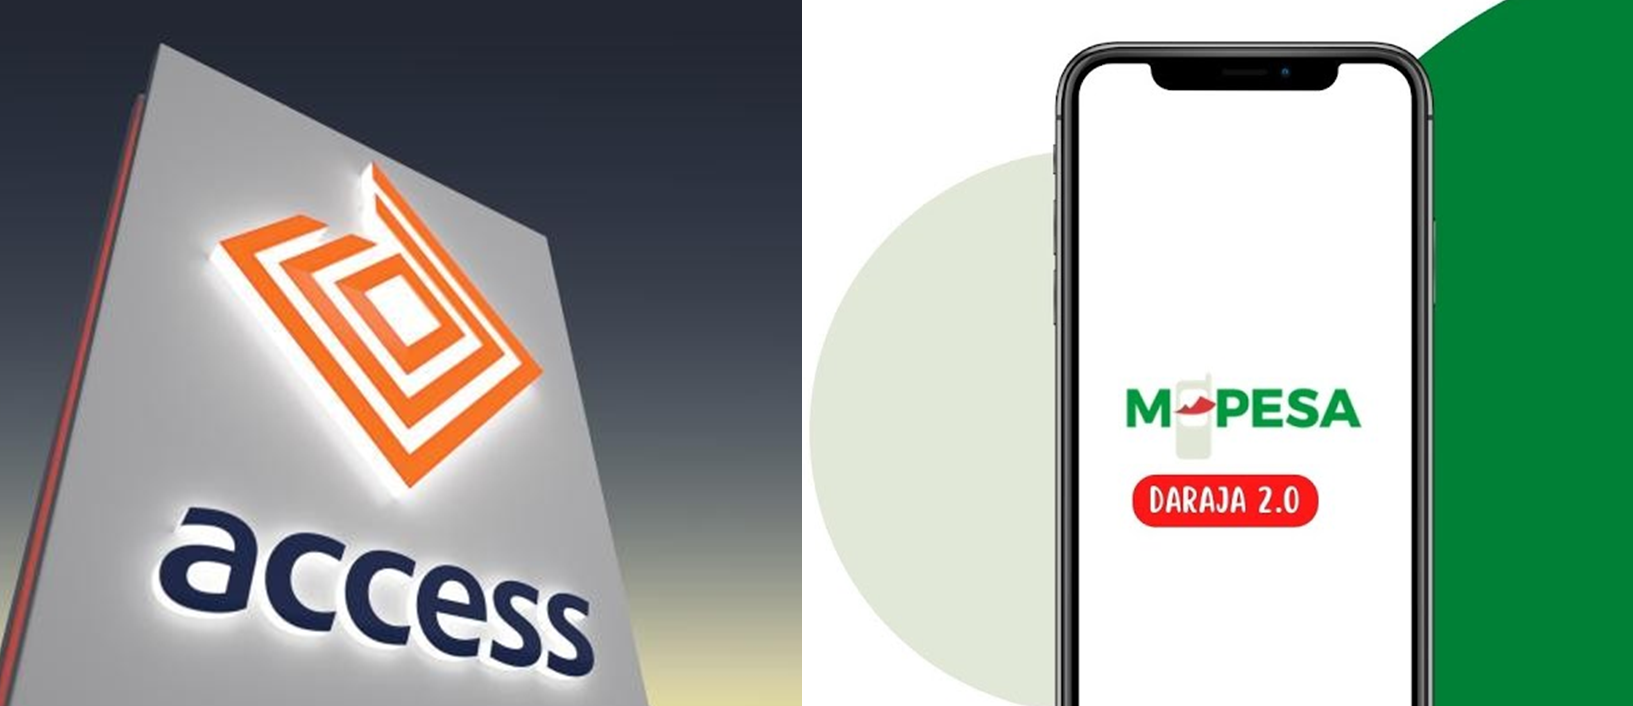 M-PESA Africa, Coronation Group collaborates with Access Holdings Plc on Remittances in Africa